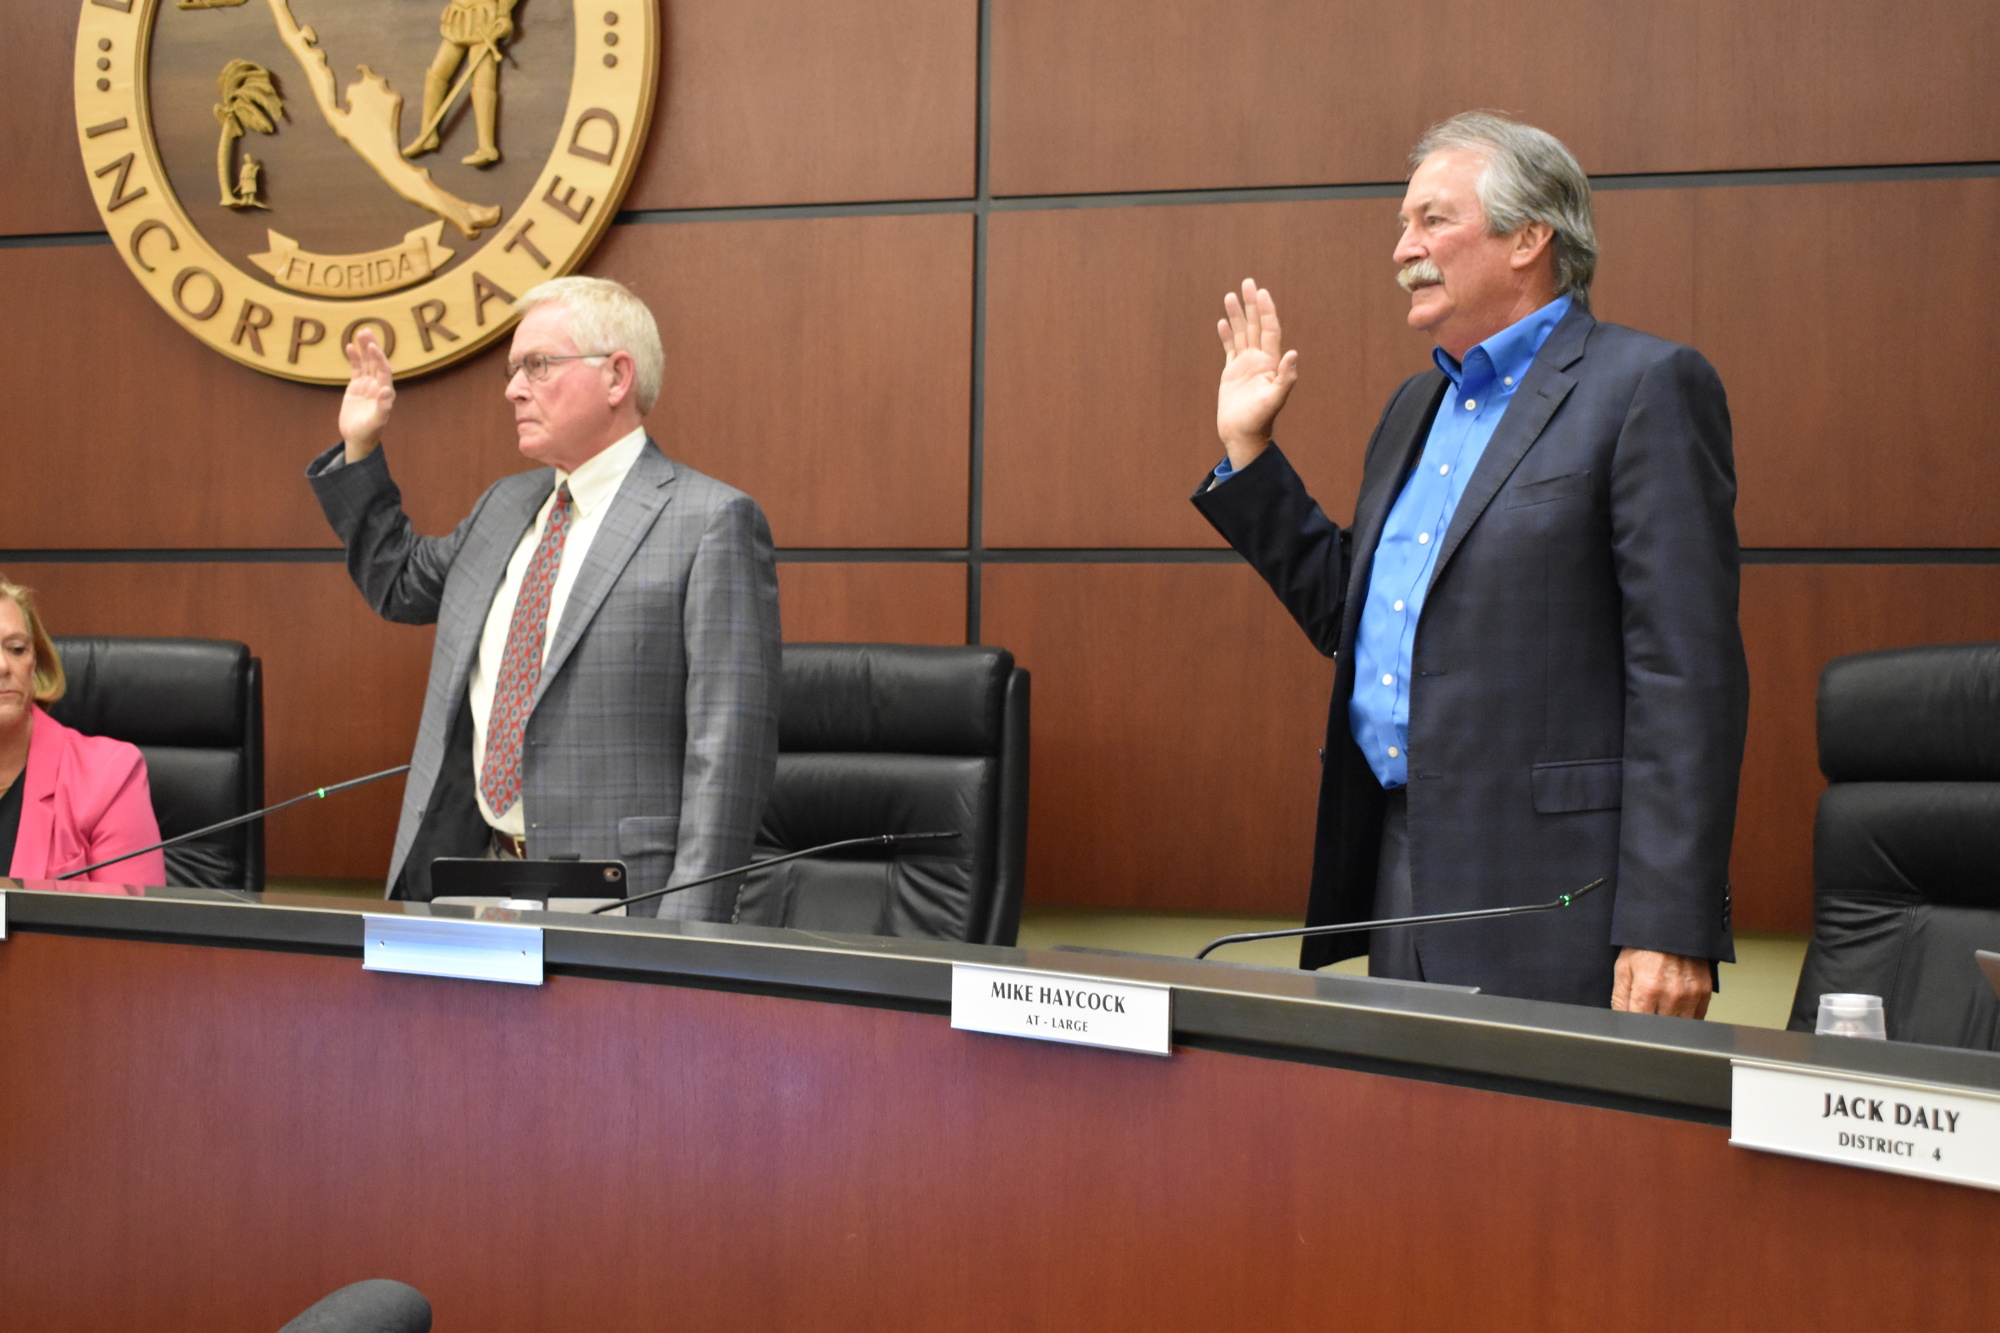 Commissioners Ken Schneier (left) and Mike Haycock (right) are sworn in as the Longboat Key mayor and vice mayor, respectively. The selection of a new mayor and vice mayor happened at a statutory meeting on Monday, March 23, 2020.